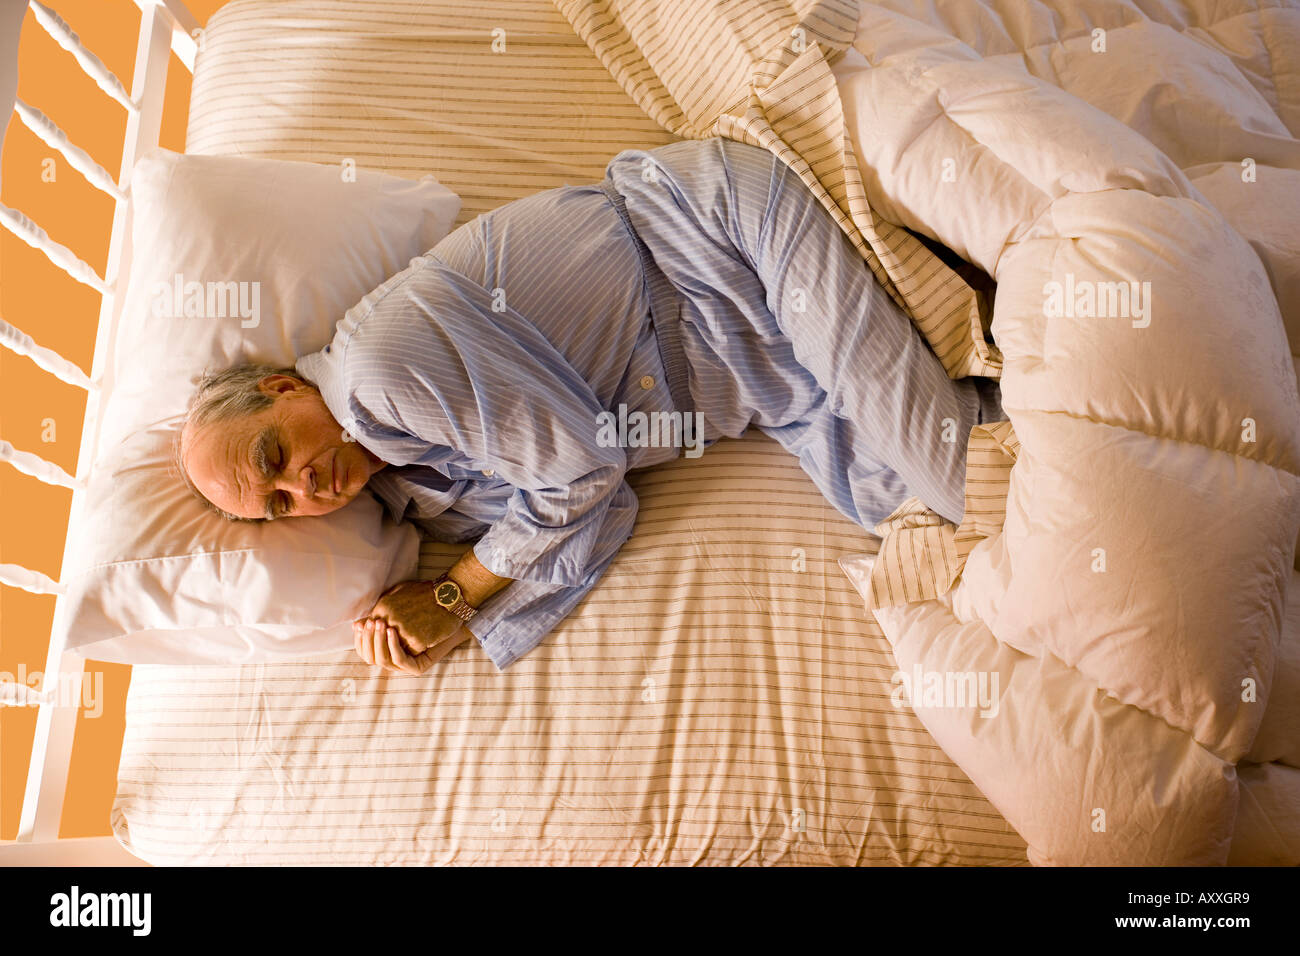 Man sleeping in the fetal position in his bed at home. Stock Photo